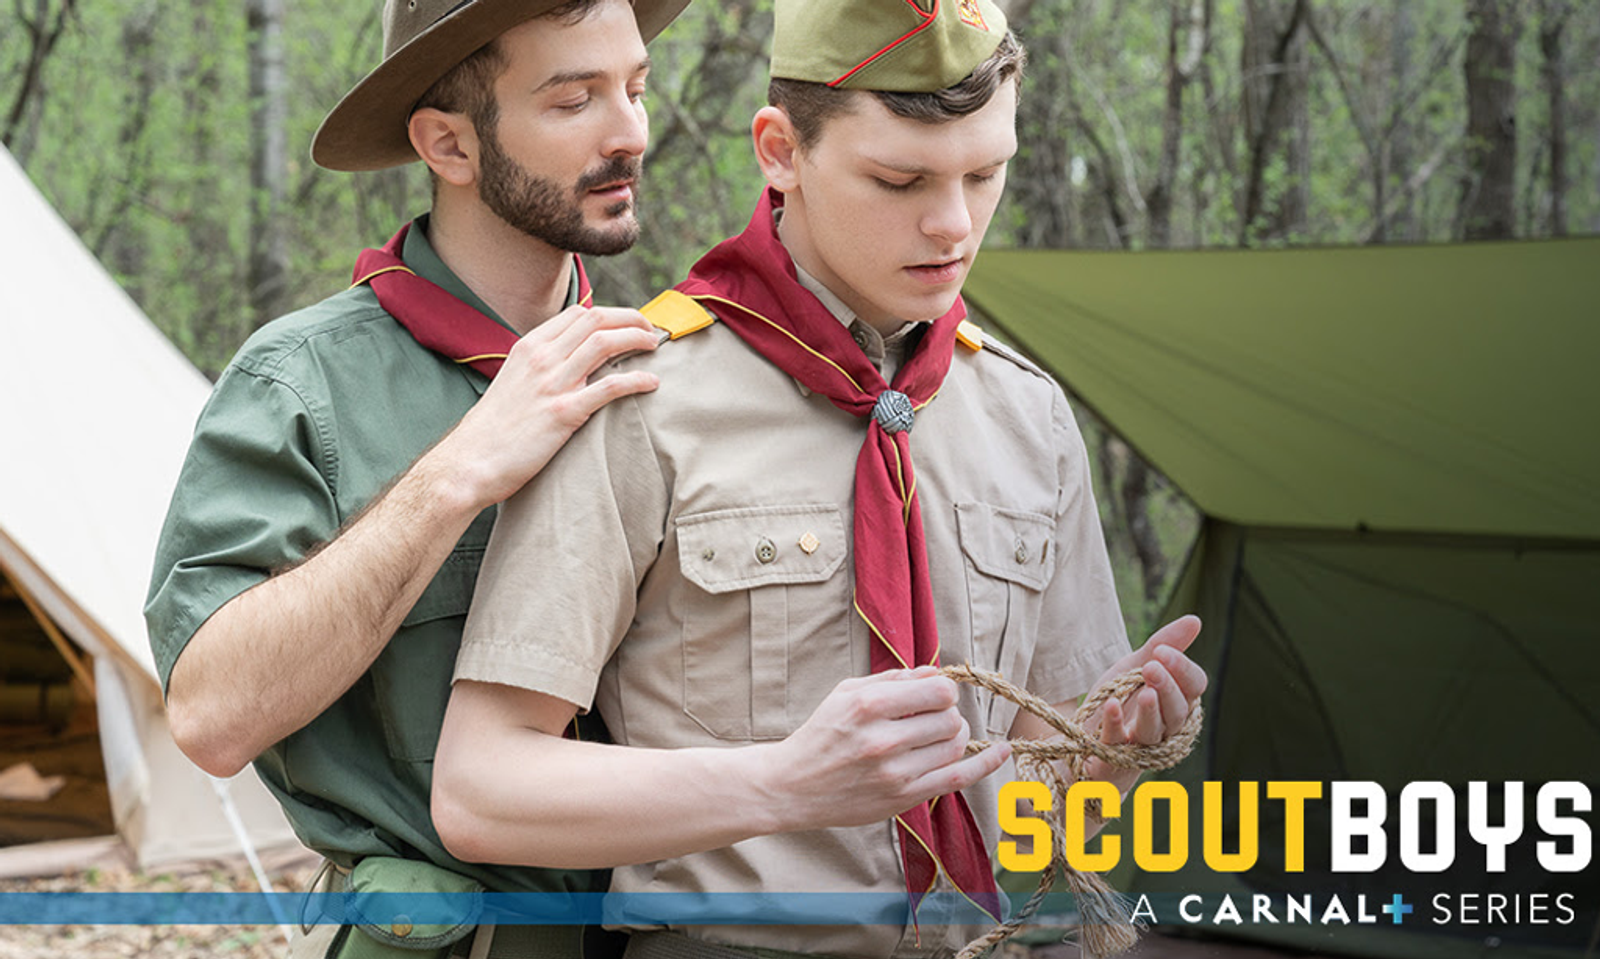 ScoutBoys Adds to 'Scout Ethan' Series With 'Learning the Ropes'